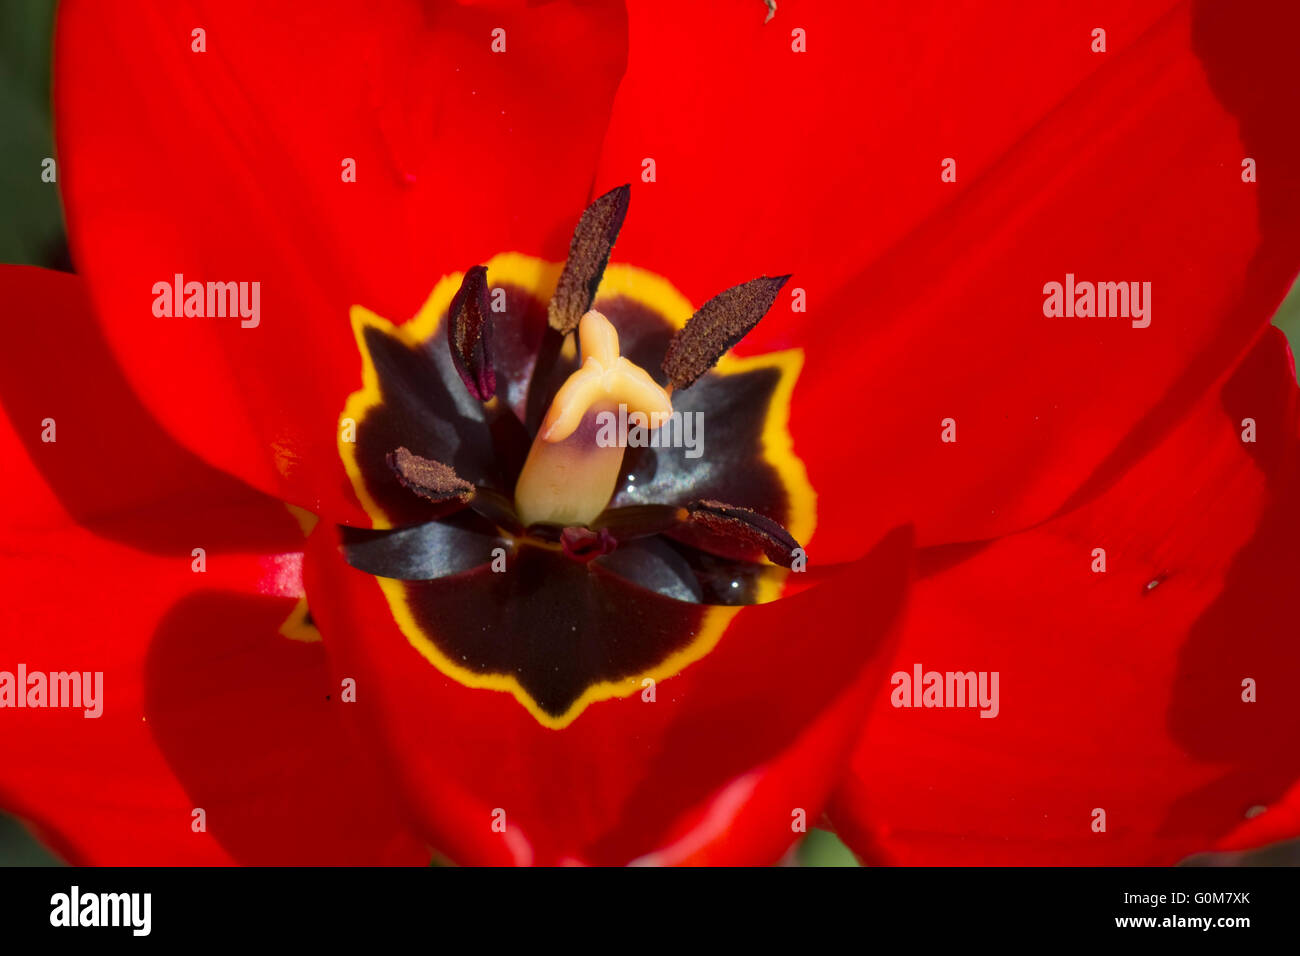 The centre of a red tulip flower showing anthers and style with distinct black and yellow markings Stock Photo